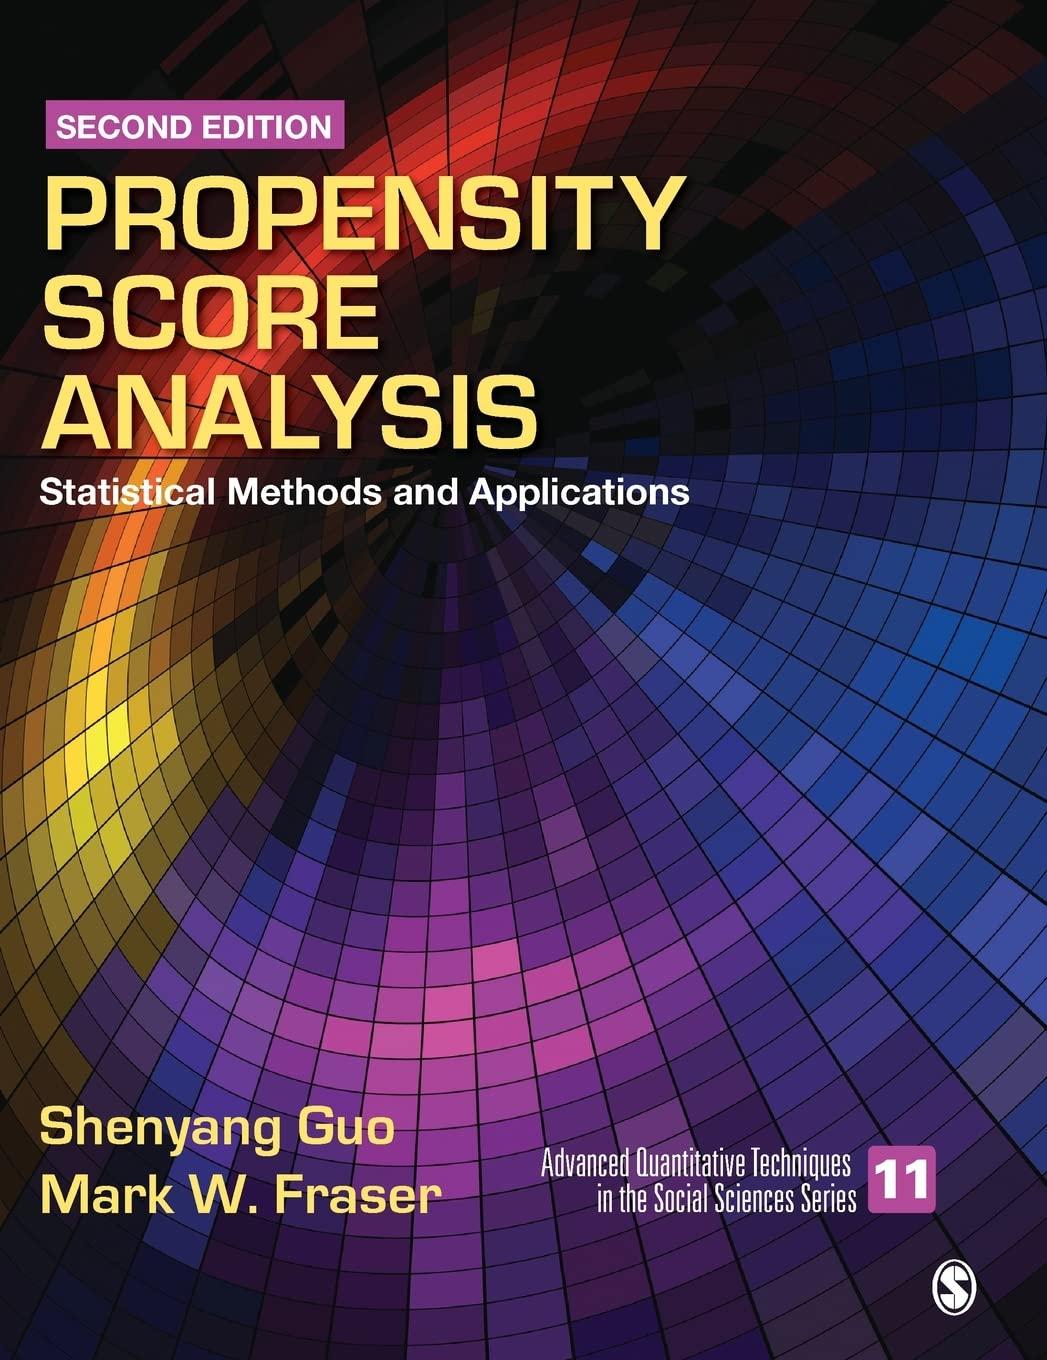 propensity score analysis statistical methods and applications 2nd edition shenyang guo, mark w. fraser